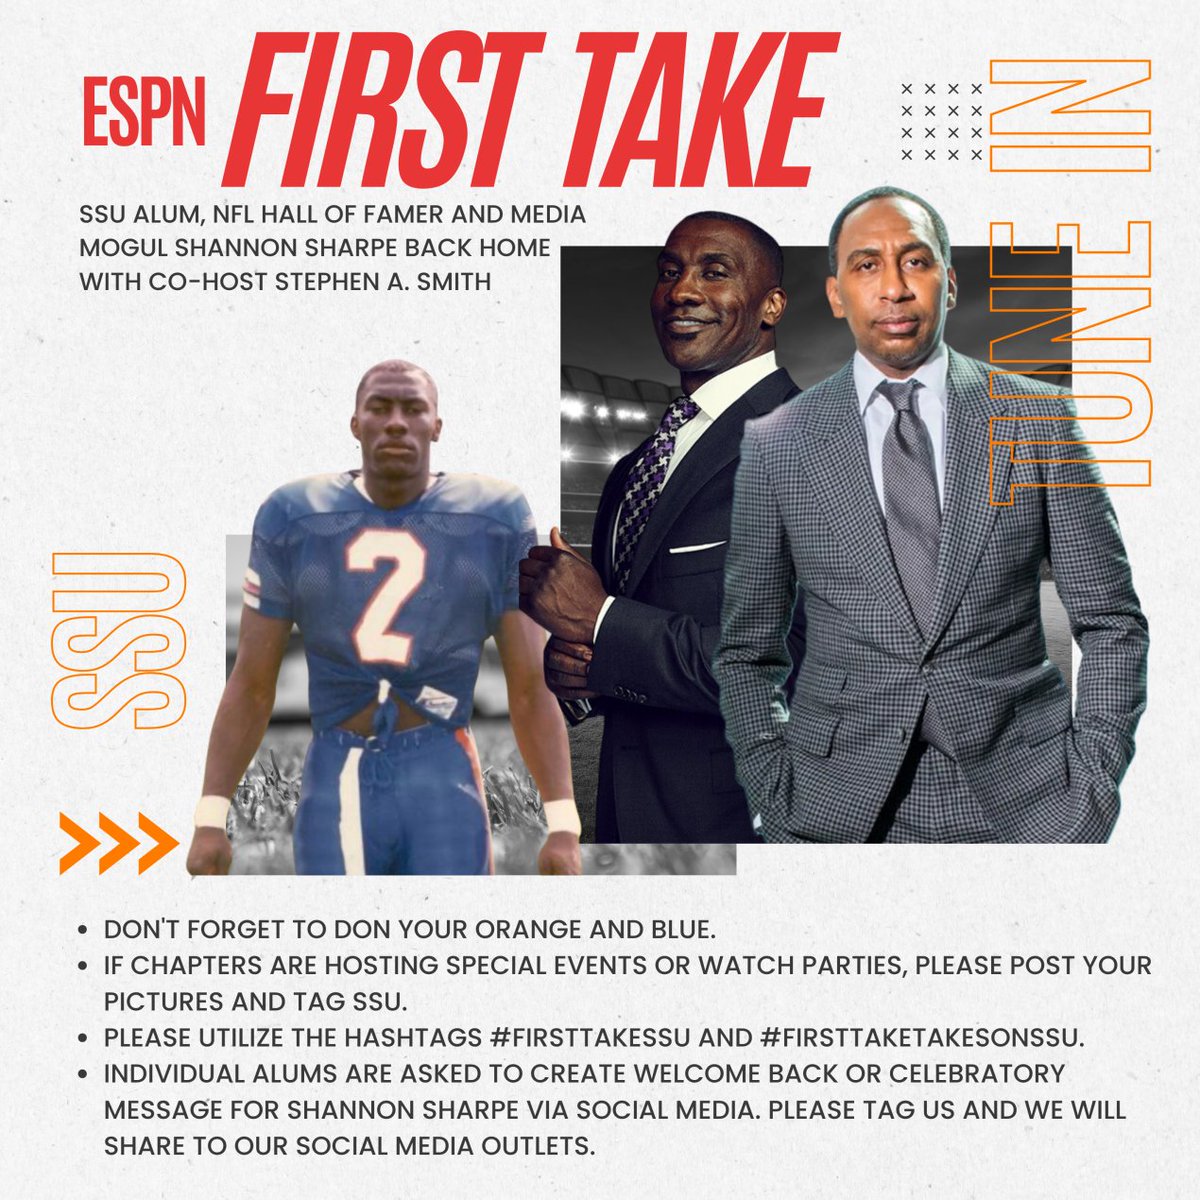 Tune in live Monday morning as @FirstTake goes live from the #UniversitybytheSea! Let's show our support for @shannonsharpe84 and share your best #welcomehomeshannnon videos in your #SSU orange and blue! #FirstTakeSSU